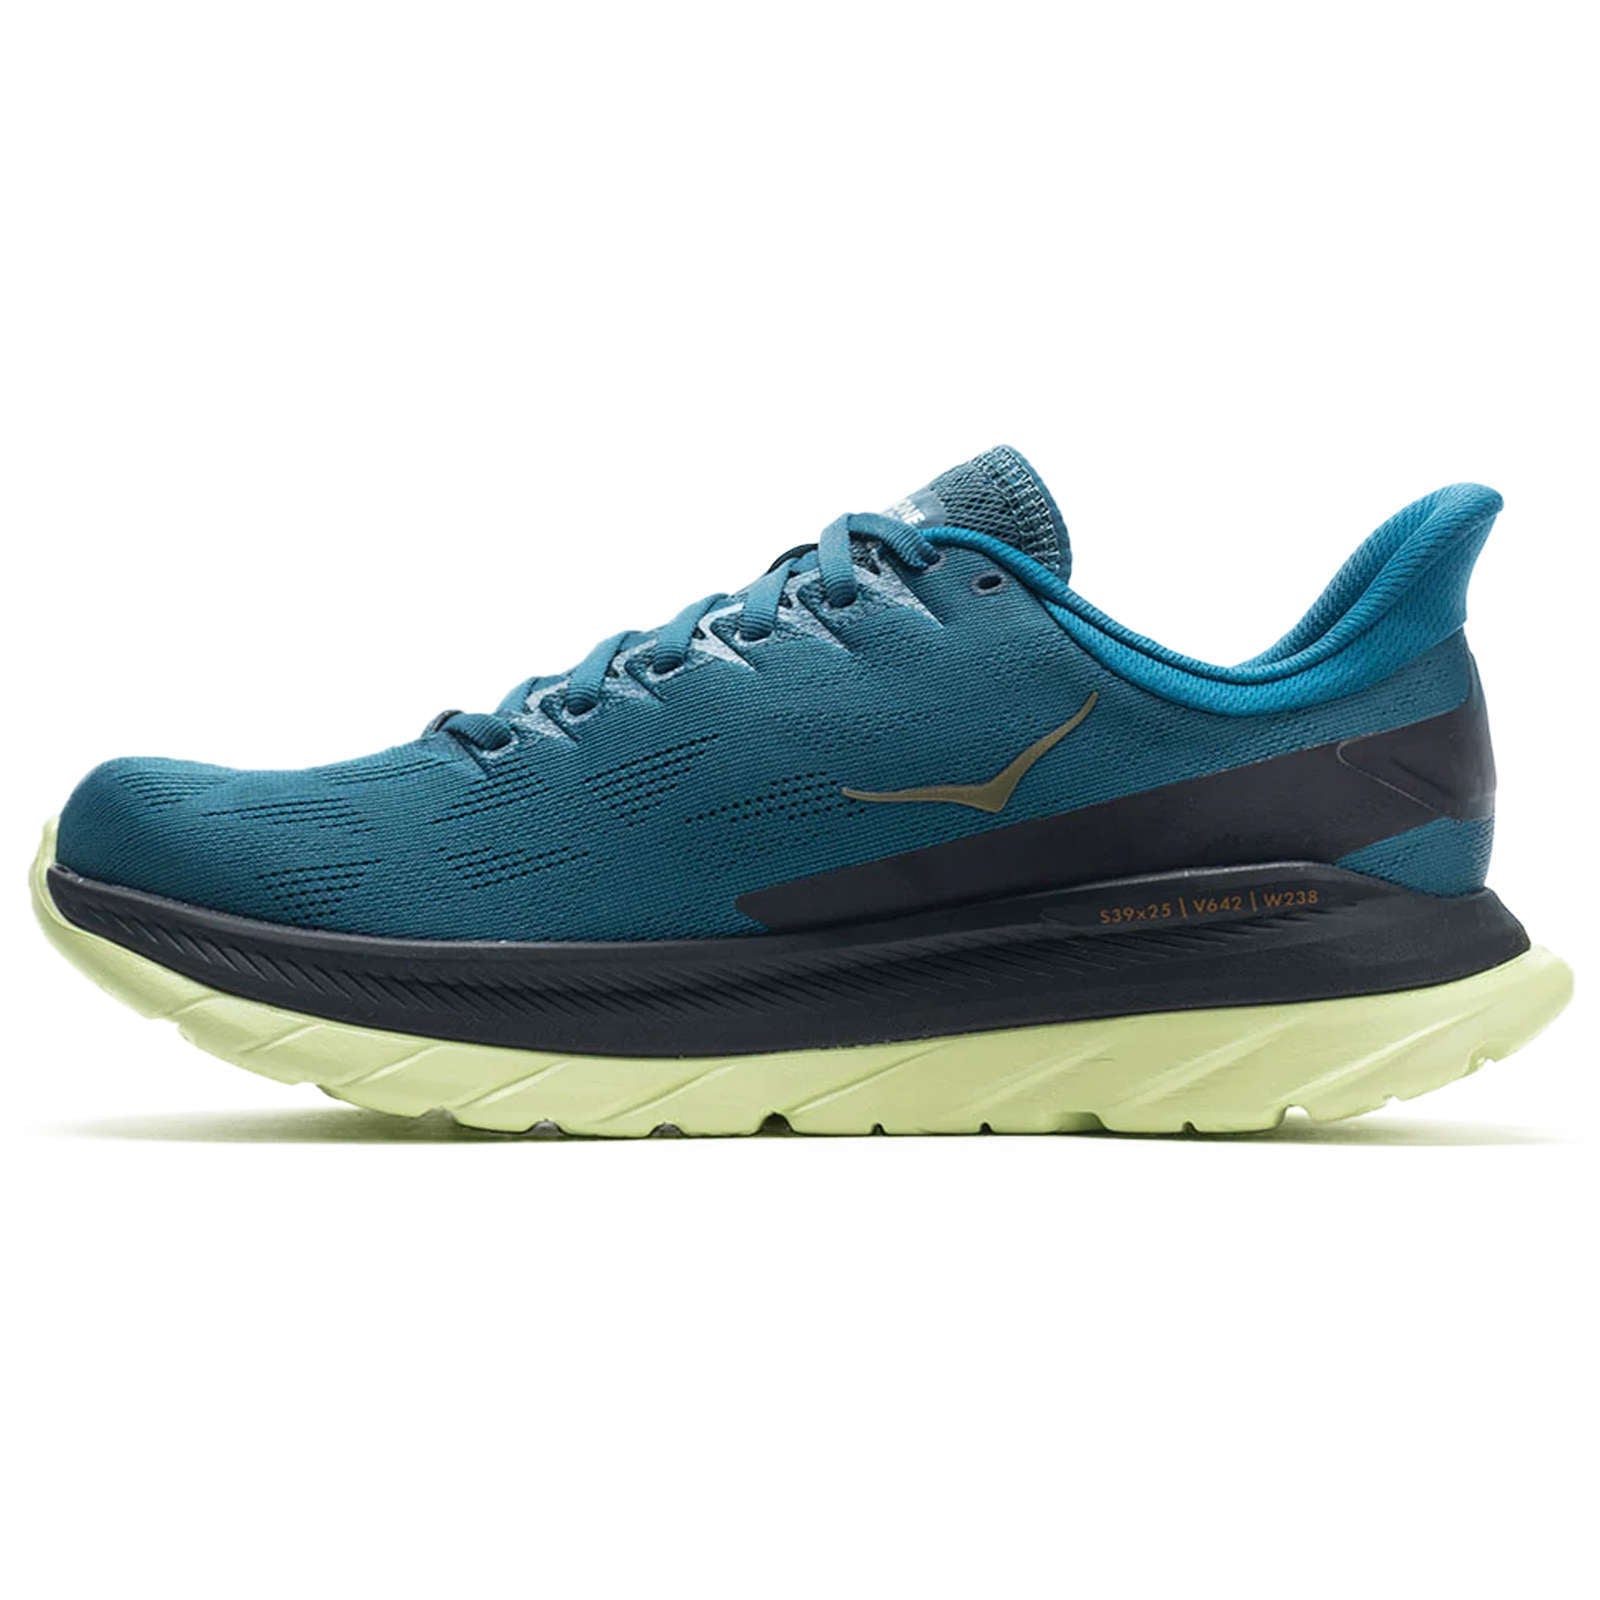 Hoka One One Mach 4 Mesh Men's Low-Top Road Running Trainers#color_blue coral black